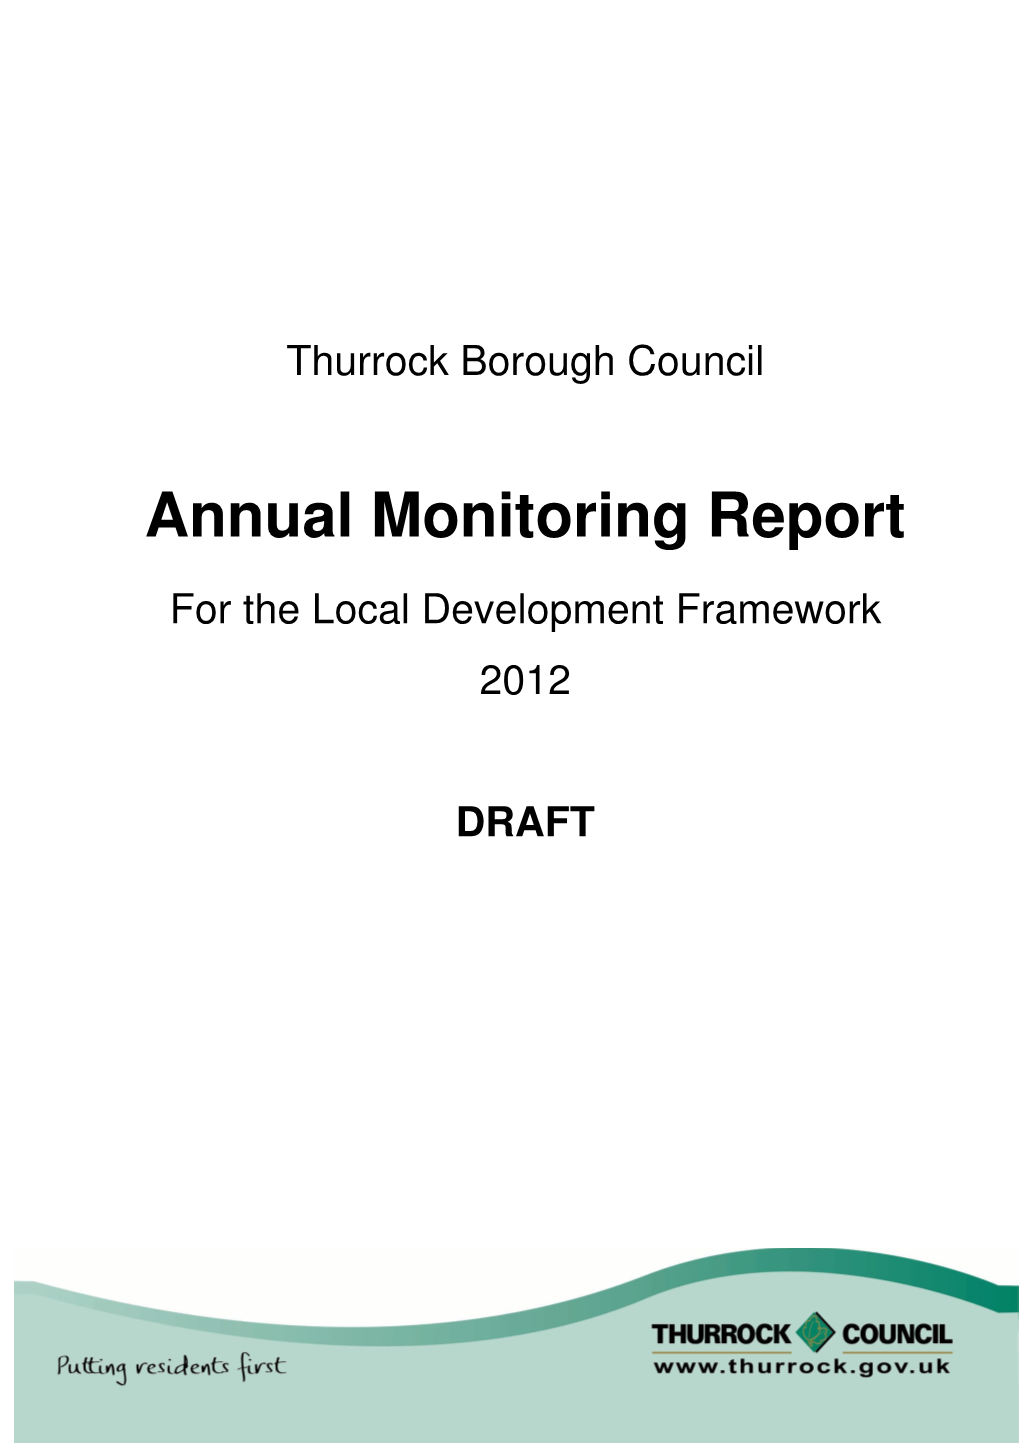 Annual Monitoring Report for the Local Development Framework 2012